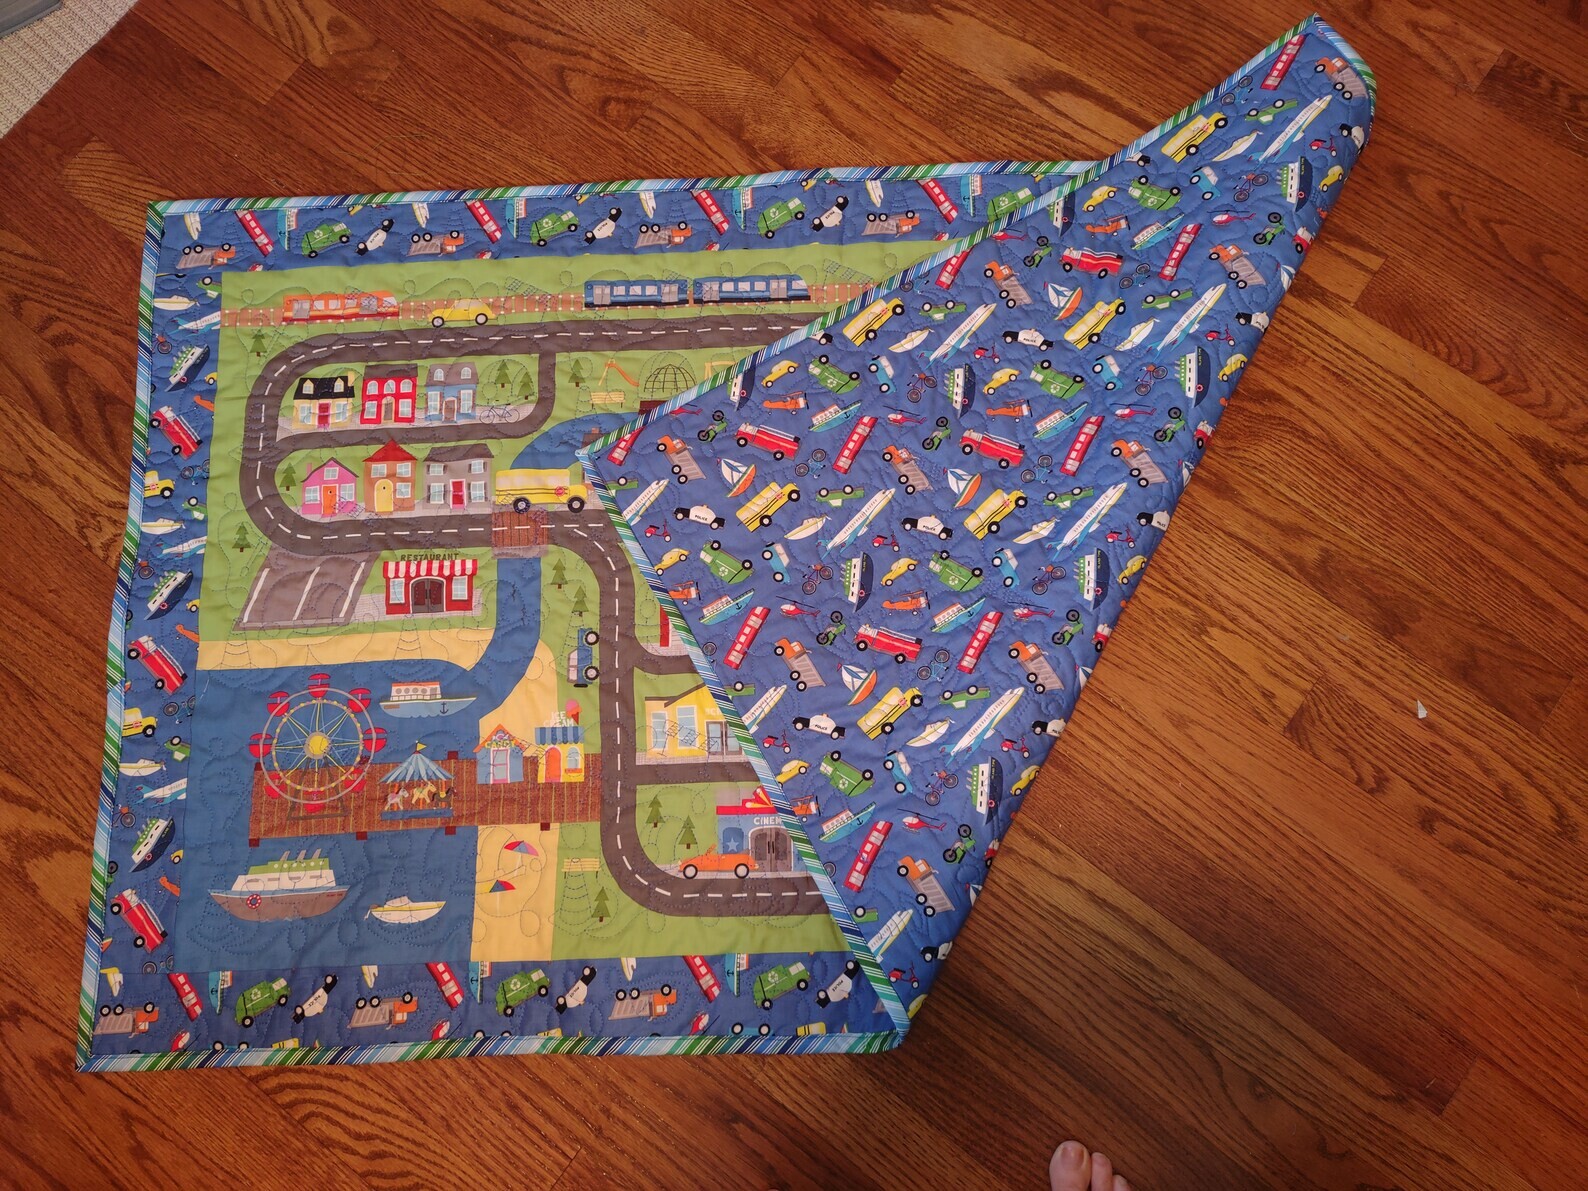 Things That Go Playmat Quilt